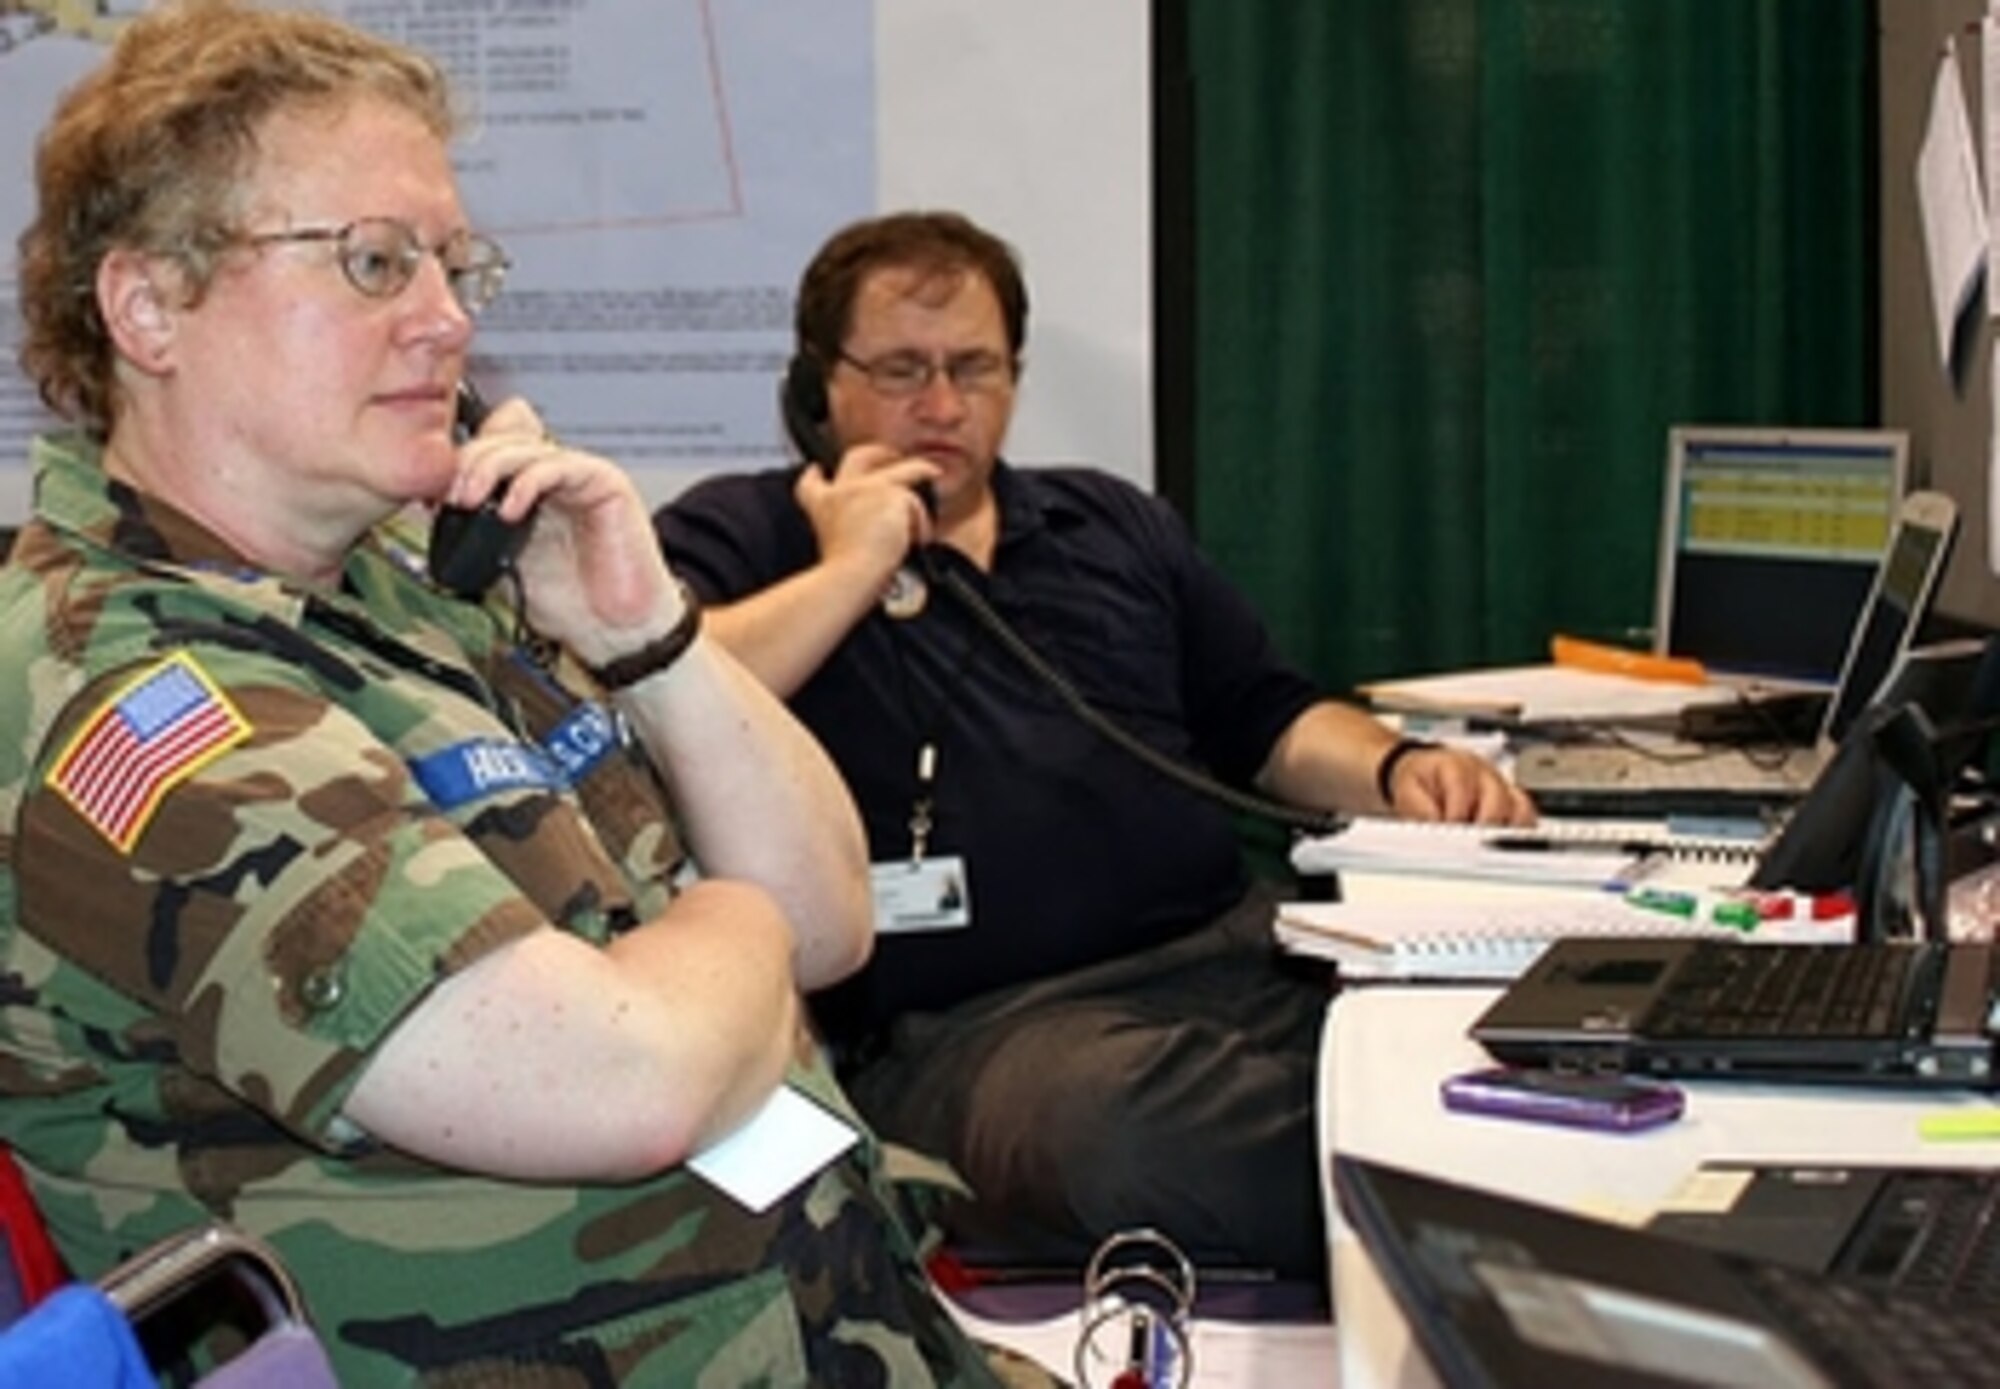 Capt. Jan Hulsey (left), from CAP’s National Operations Center, and Maj. David Hester, a CAP incident commander and the Alabama Wing’s director of communications, work the phone lines at CAP’s “Air Ops” desk in the command center. Photos by Capt. Phil Norris